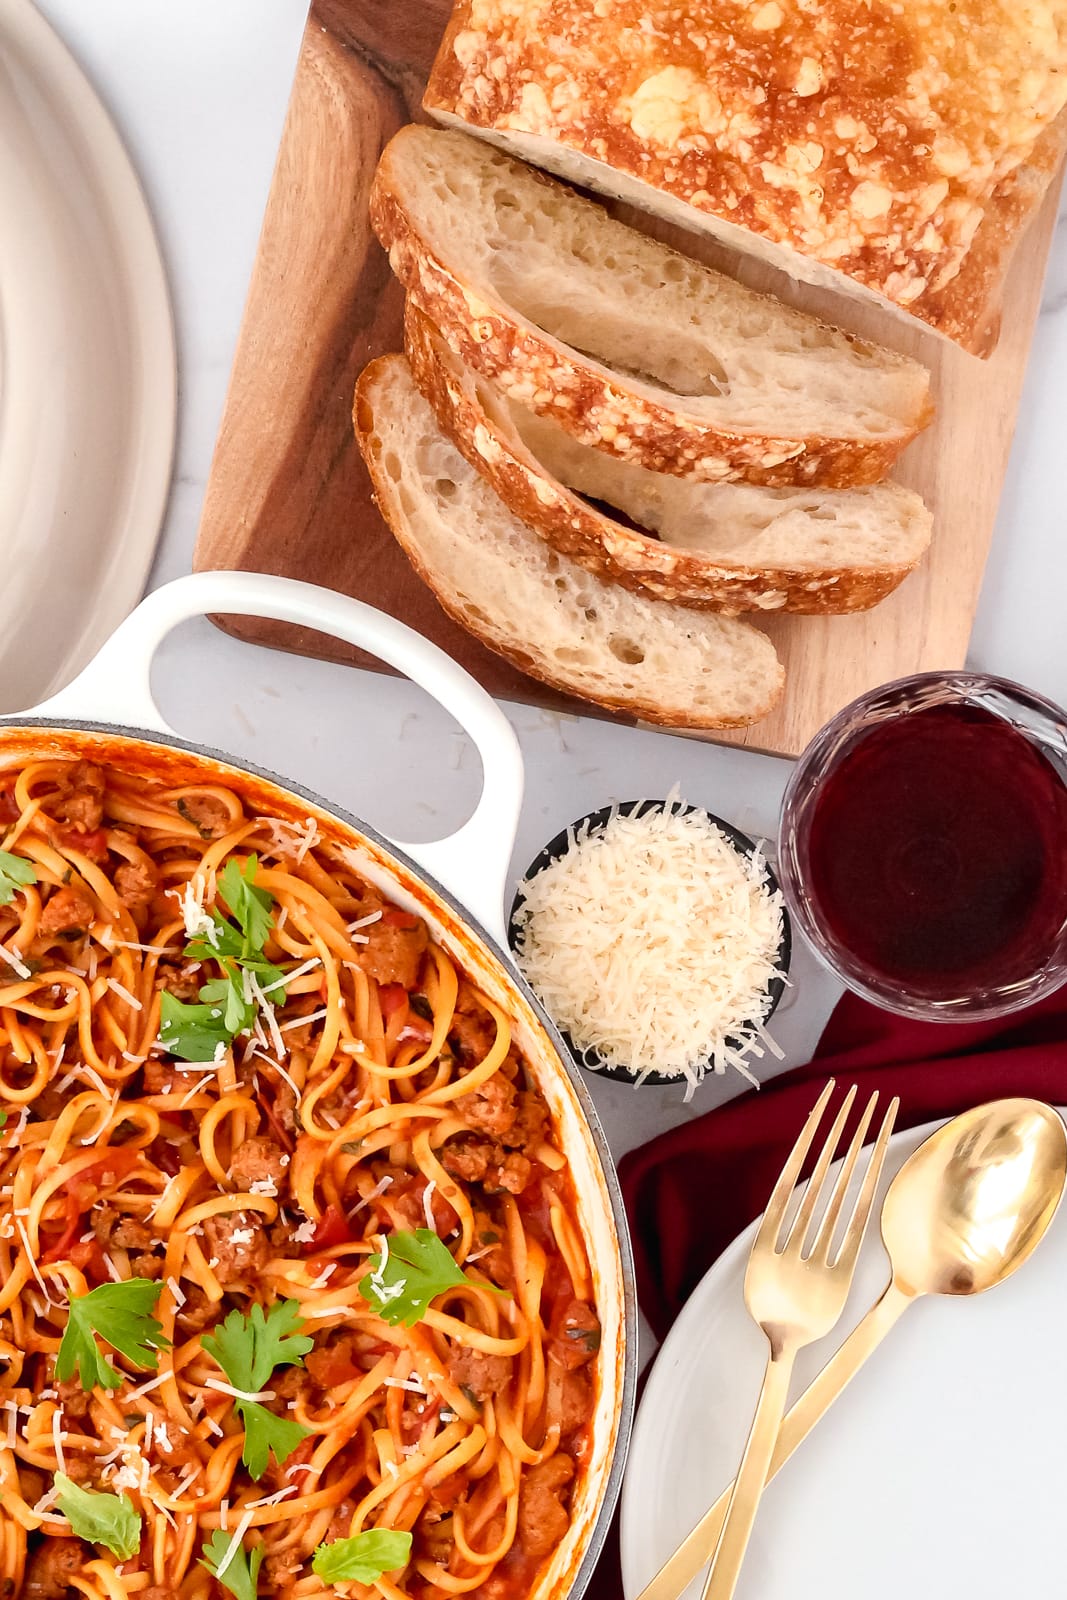 bread, wine and shredded parmesan cheese - sides for a one pot pasta